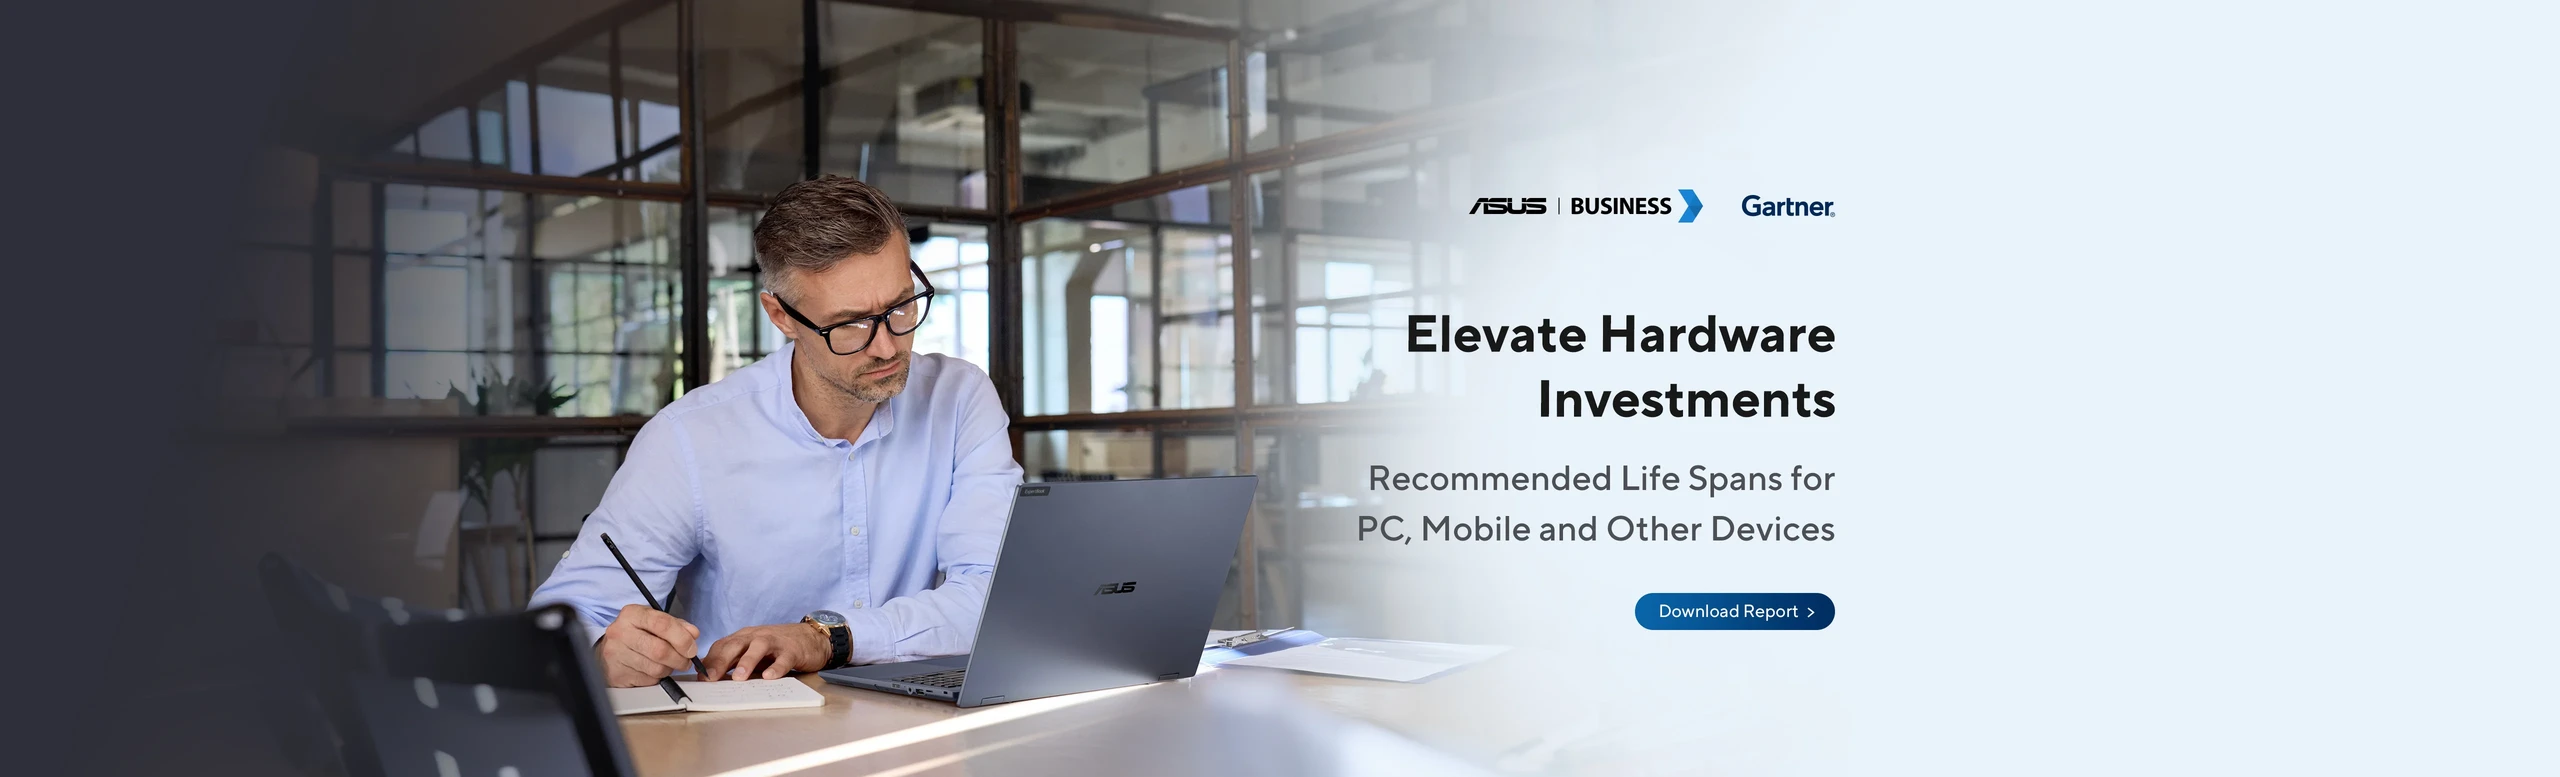 Gartner® Report.  Elevate Hardware Investments: The Key to Exceptional Performance. Recommended Life Spans for PC, Mobile and Other Devices.